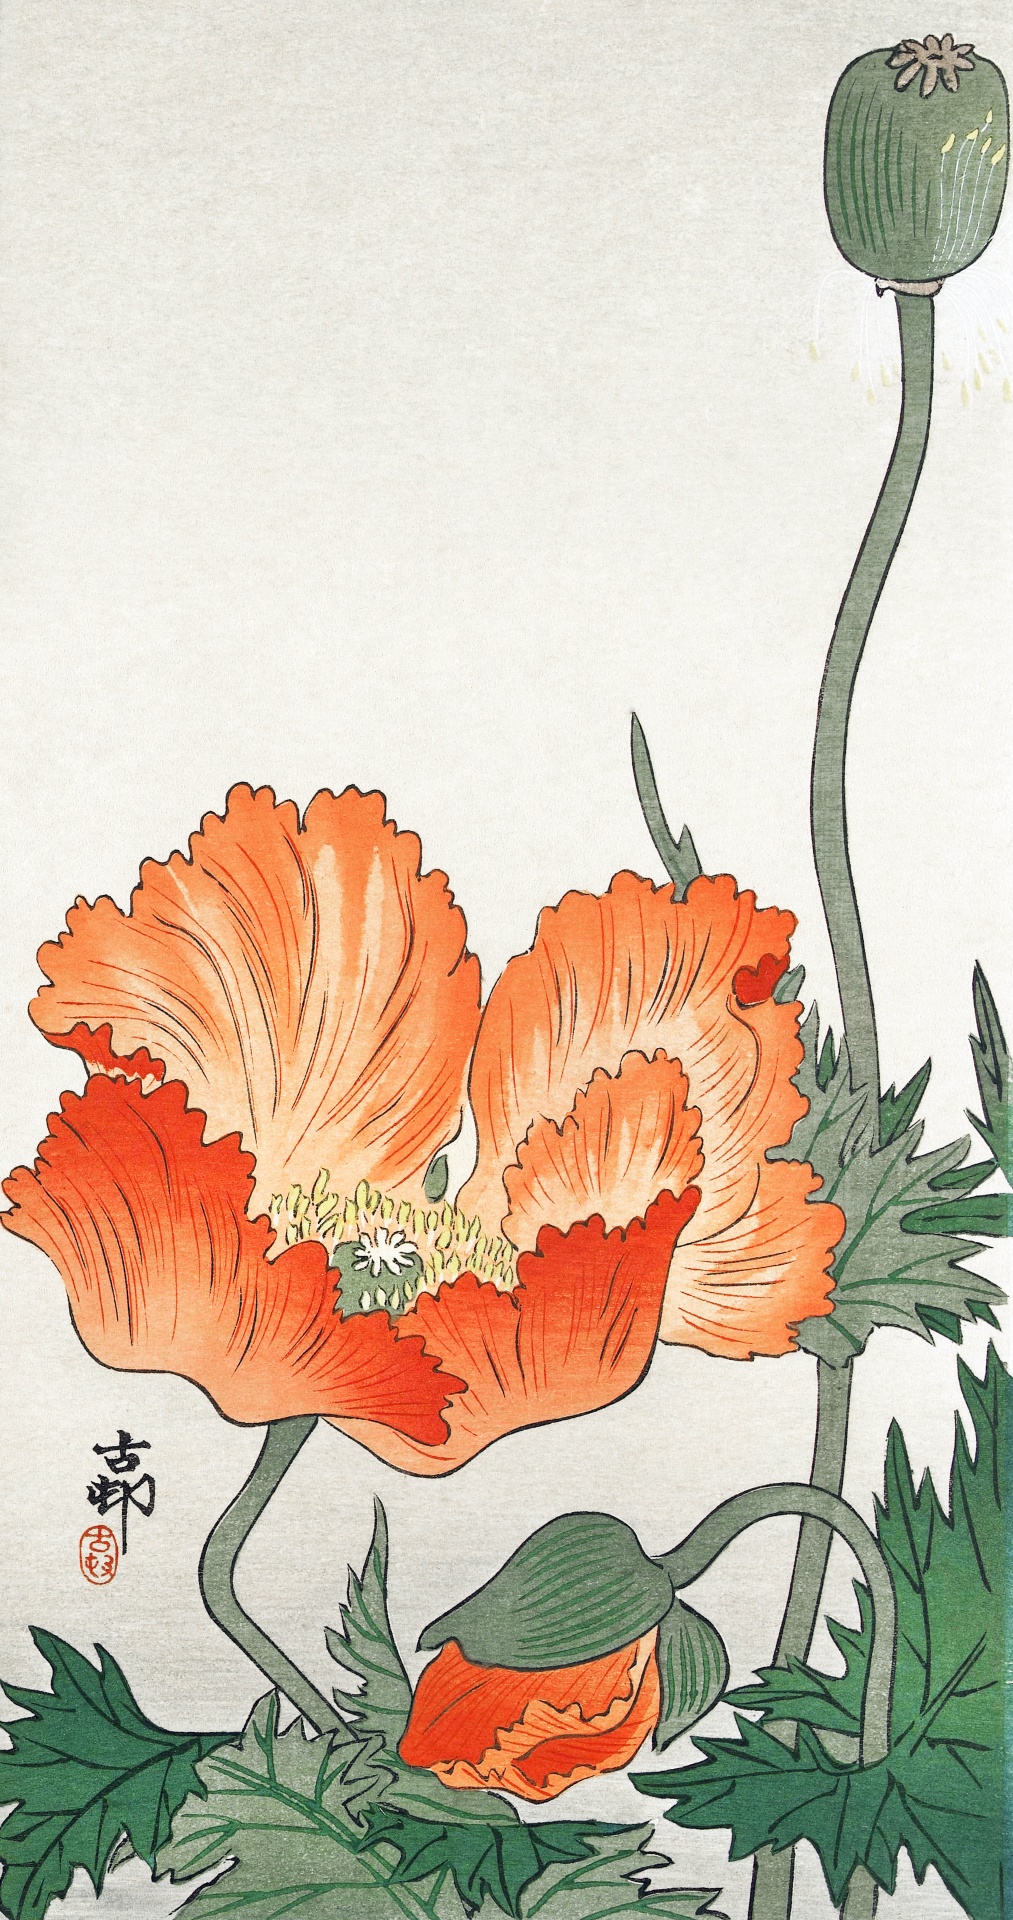 Poppy Blossom Art Vintage Japan China Chinese Japanese Nature Publik Domain 18th 19th Century Vintage 1900 Old Antique Illustration Painted Painting Poster Print